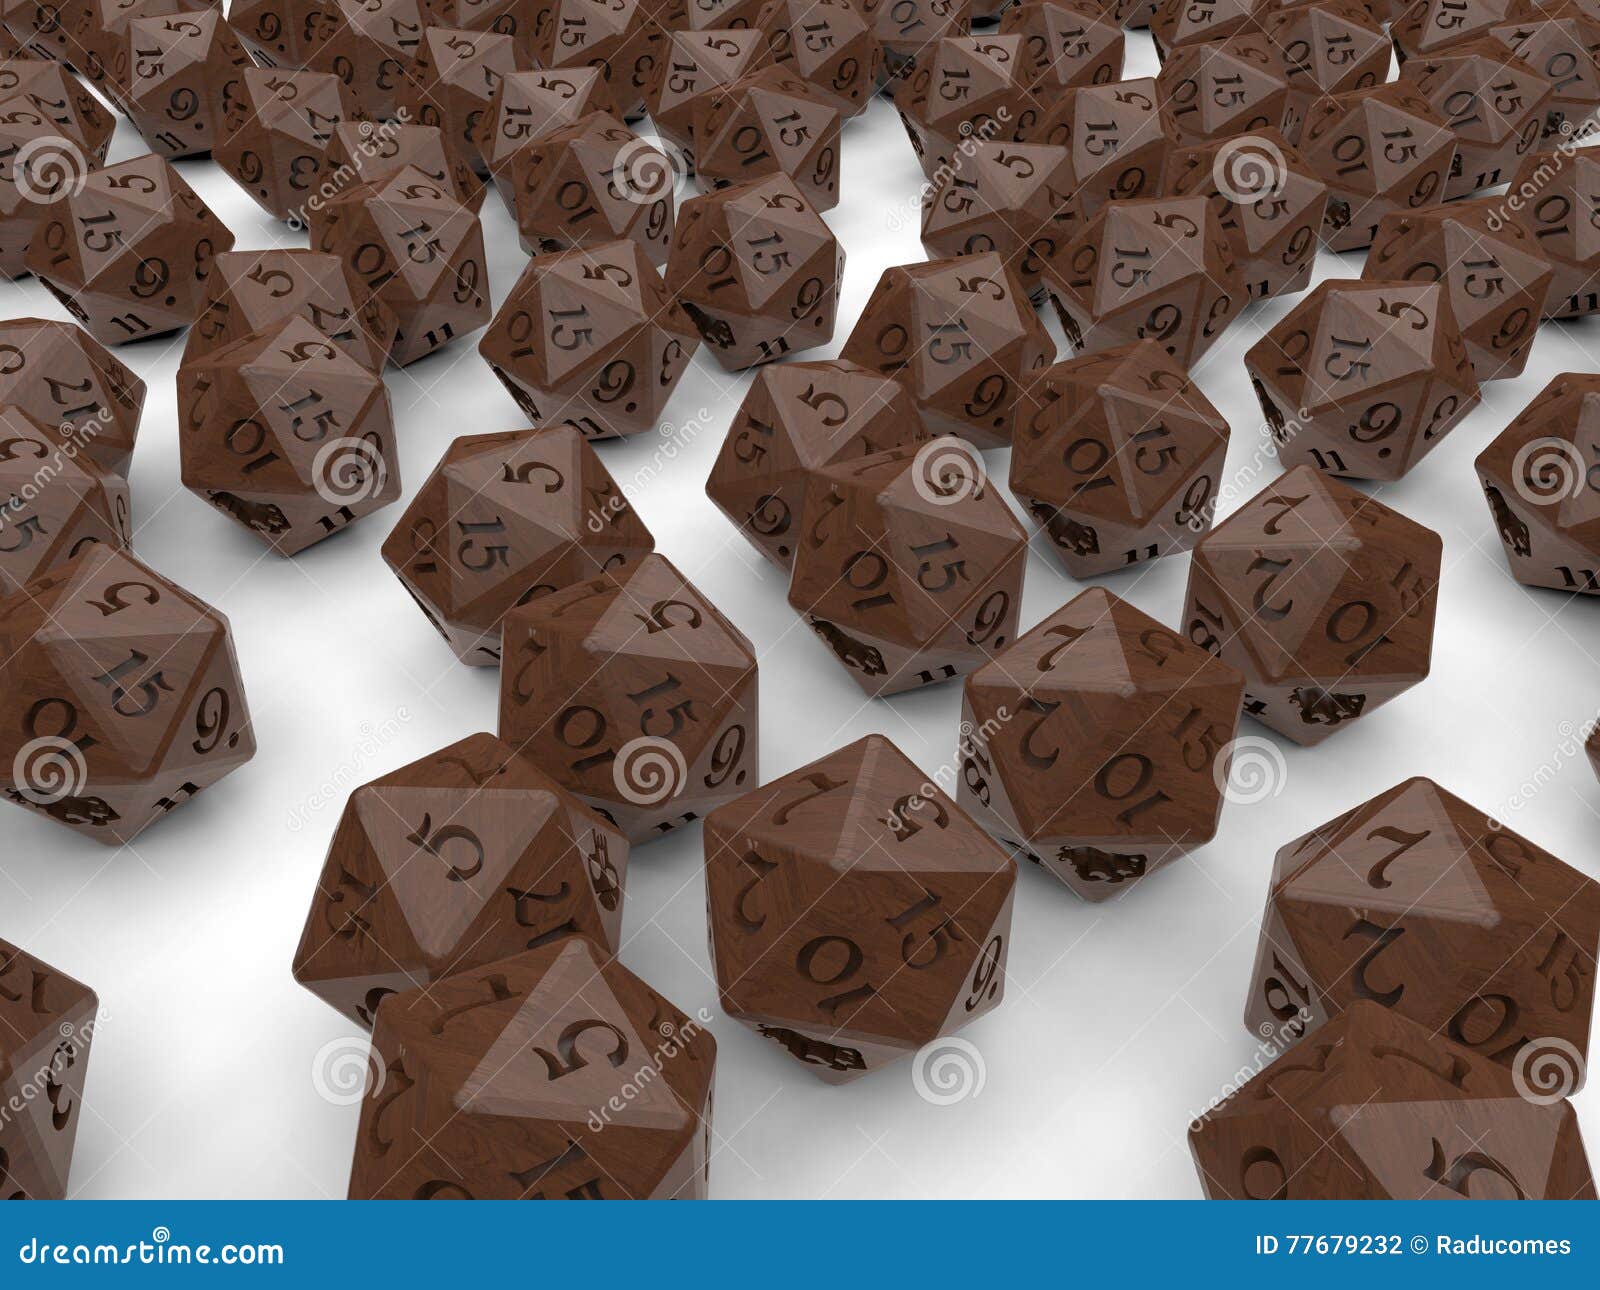 Dungeon and dragons dices stock illustration. Illustration of amusement